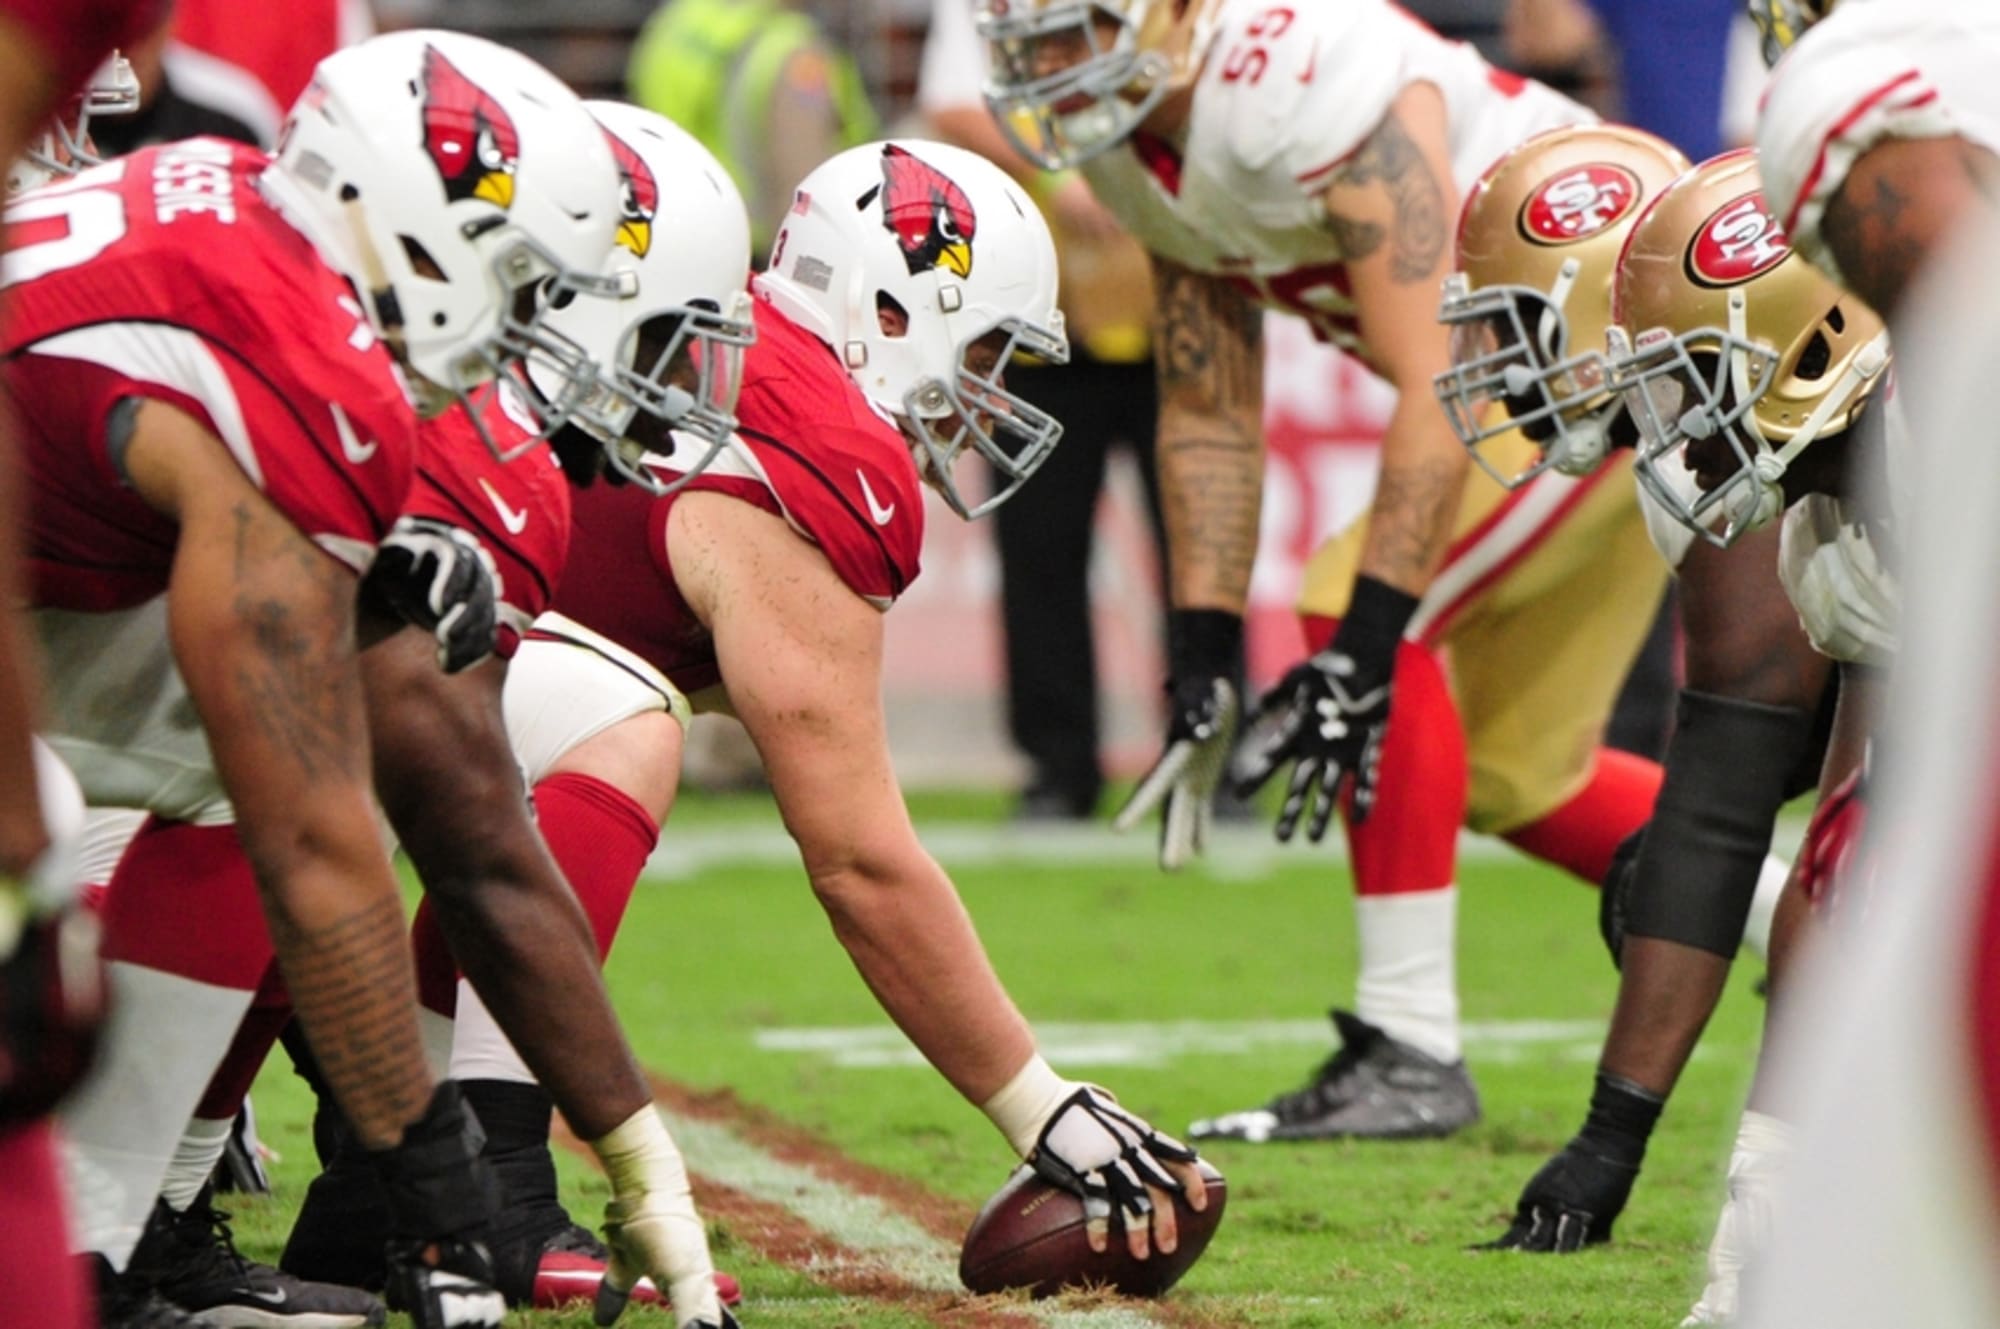 49ers Vs Cardinals Highlights Desperation Time For The 49ers Means Another Turnover As Cj